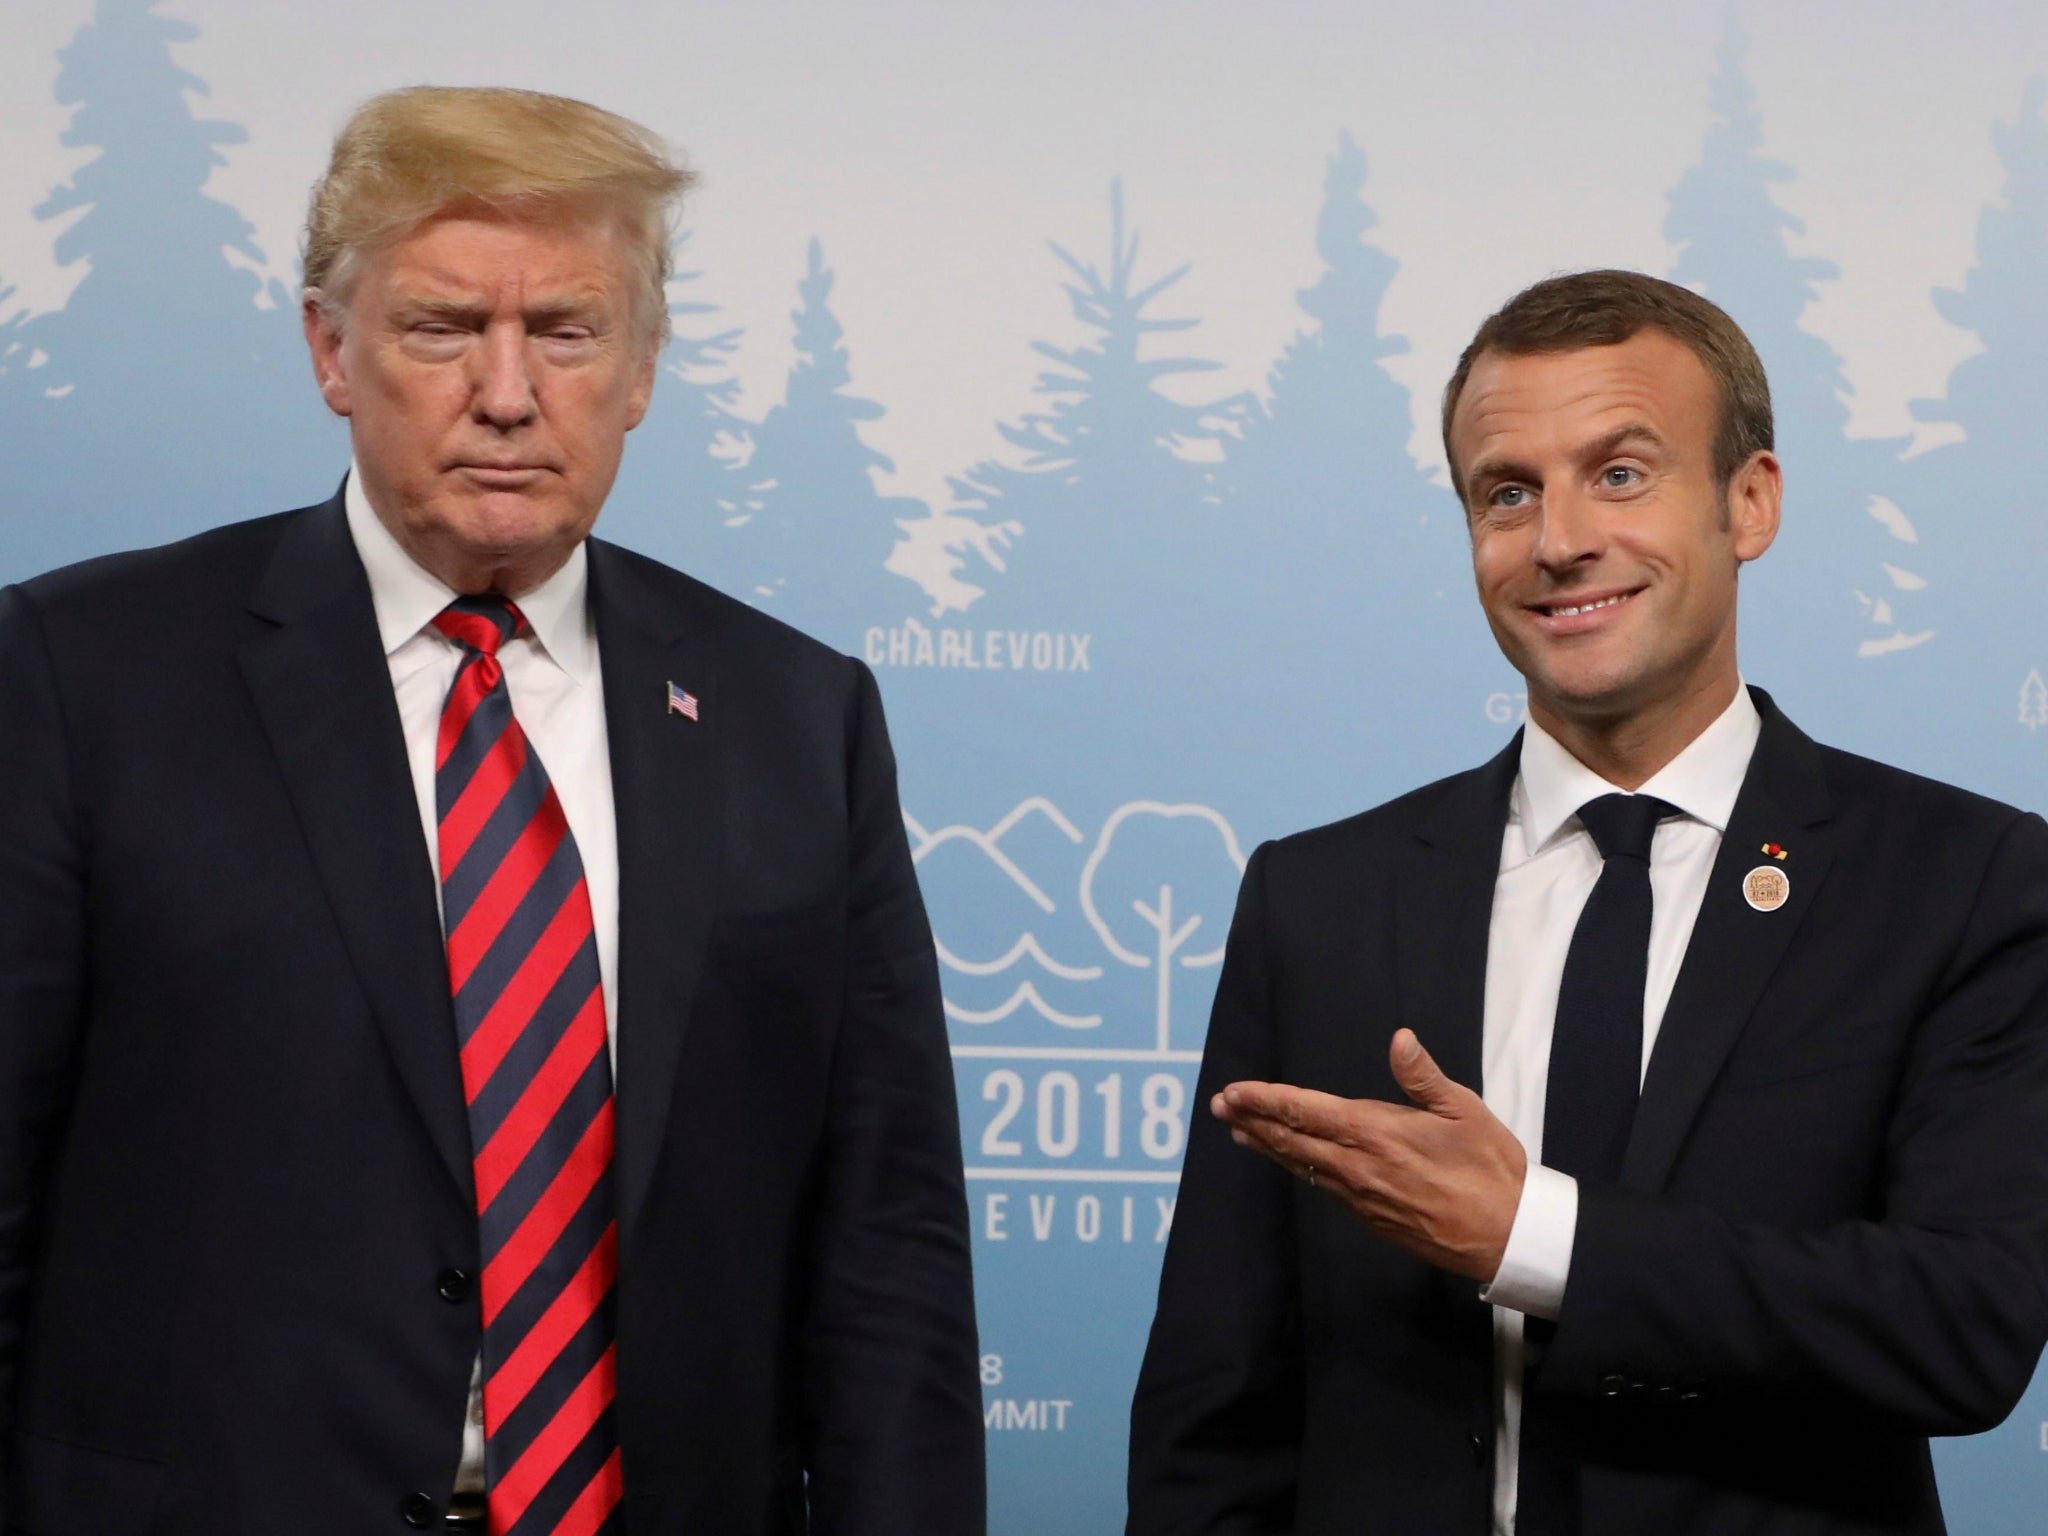 Mr Trump and Mr Macron have frequently said they get along well in spite of their policy differences